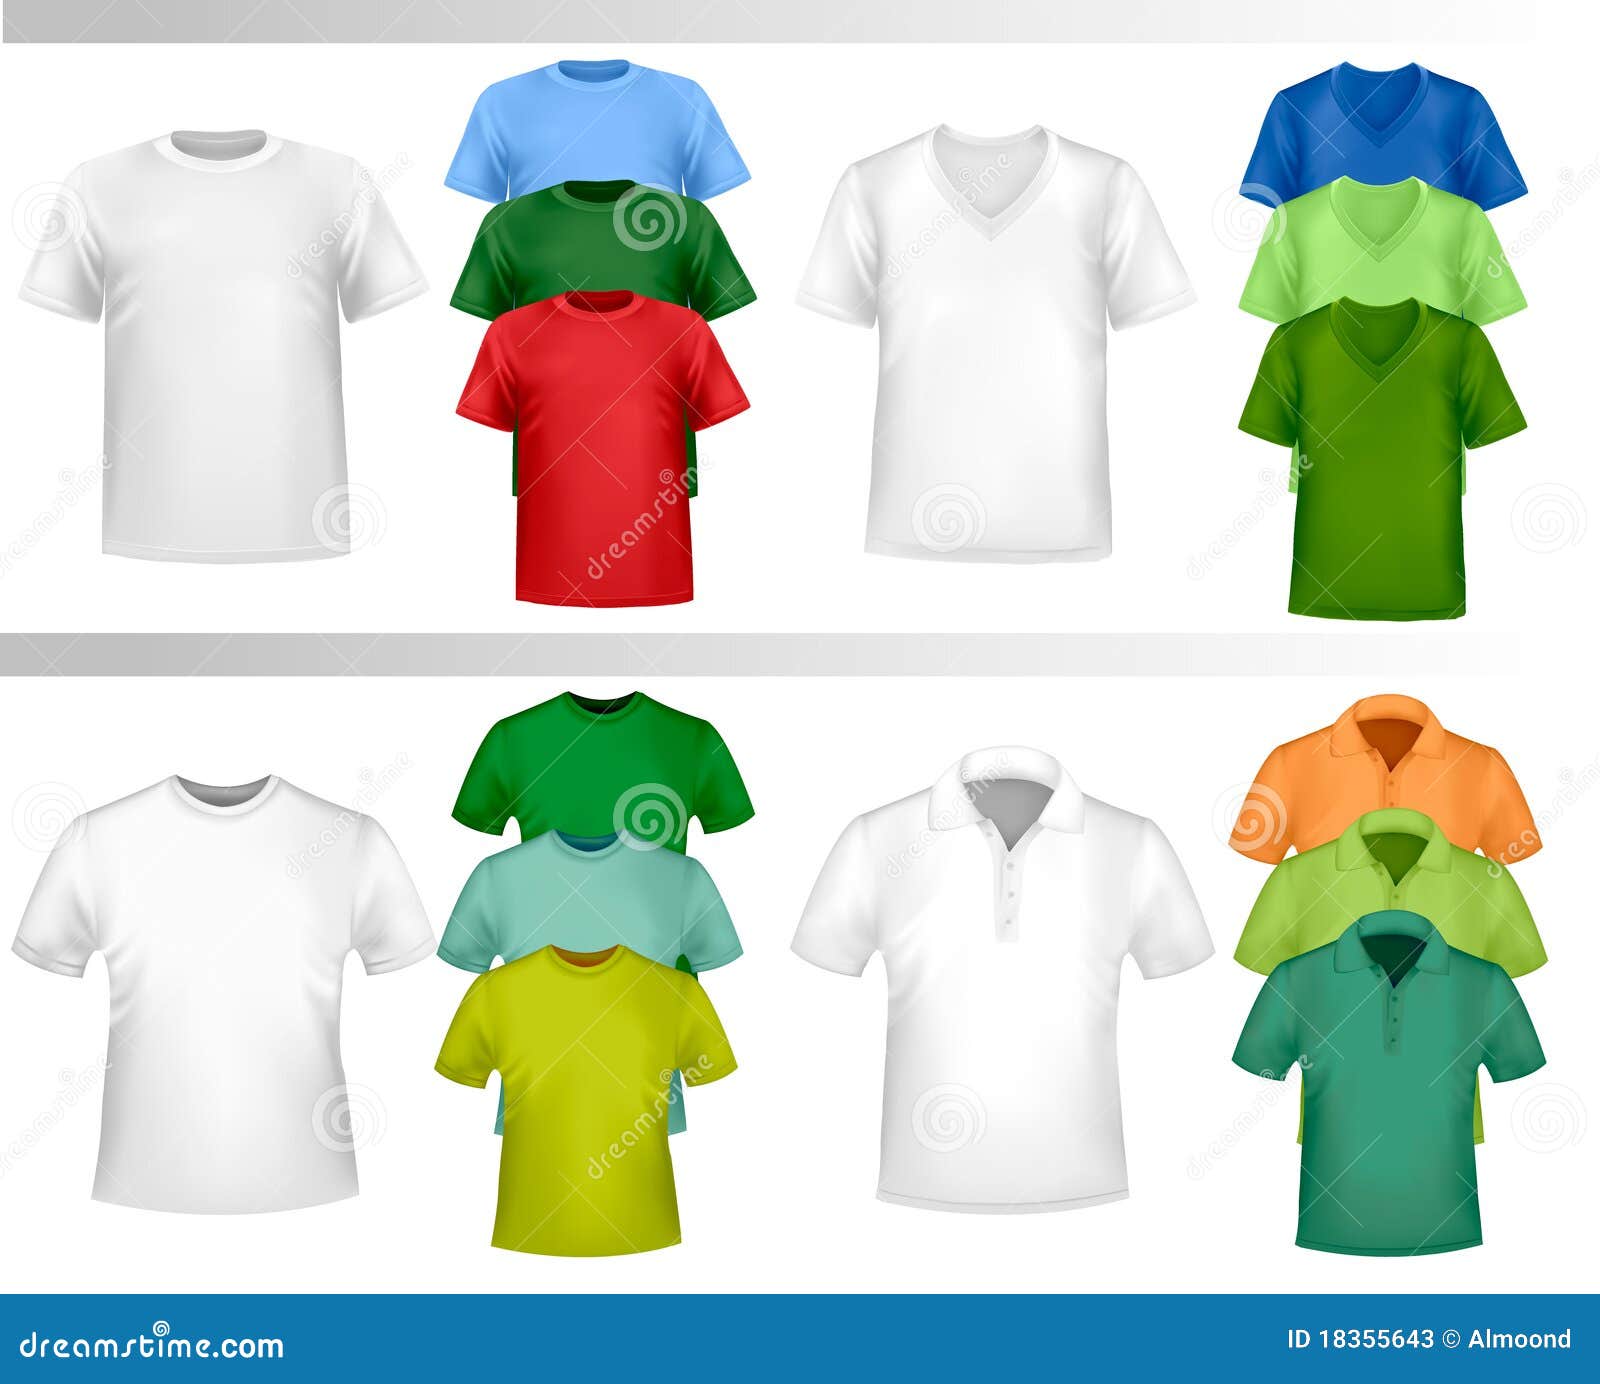 Color T-shirt Design Template. Vector Stock Vector - Illustration of ...